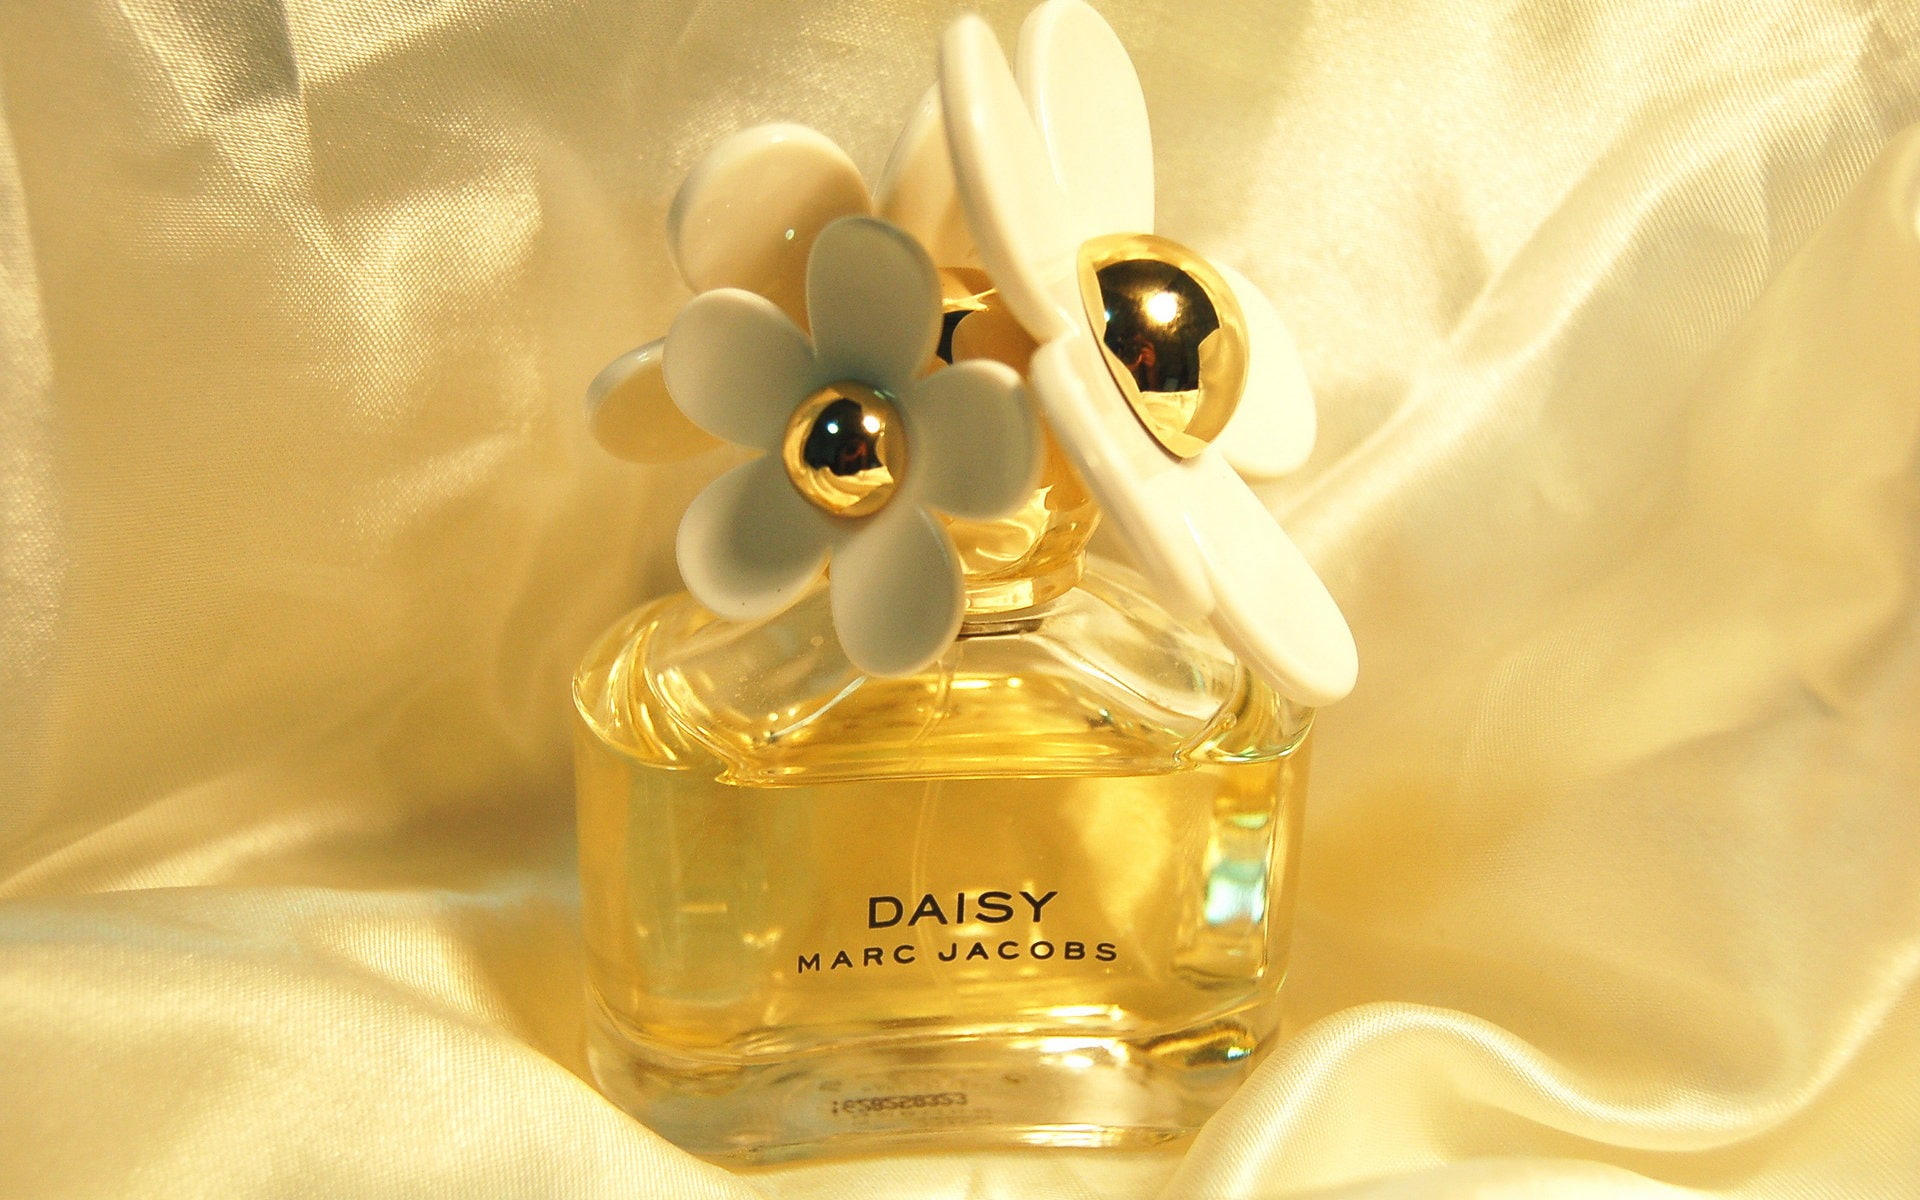 Daisy Brand Perfume Wallpapers Marc Jacobs Daisy Fragrance 品牌 香水 壁纸 Hd Wallpaper Backgrounds Download